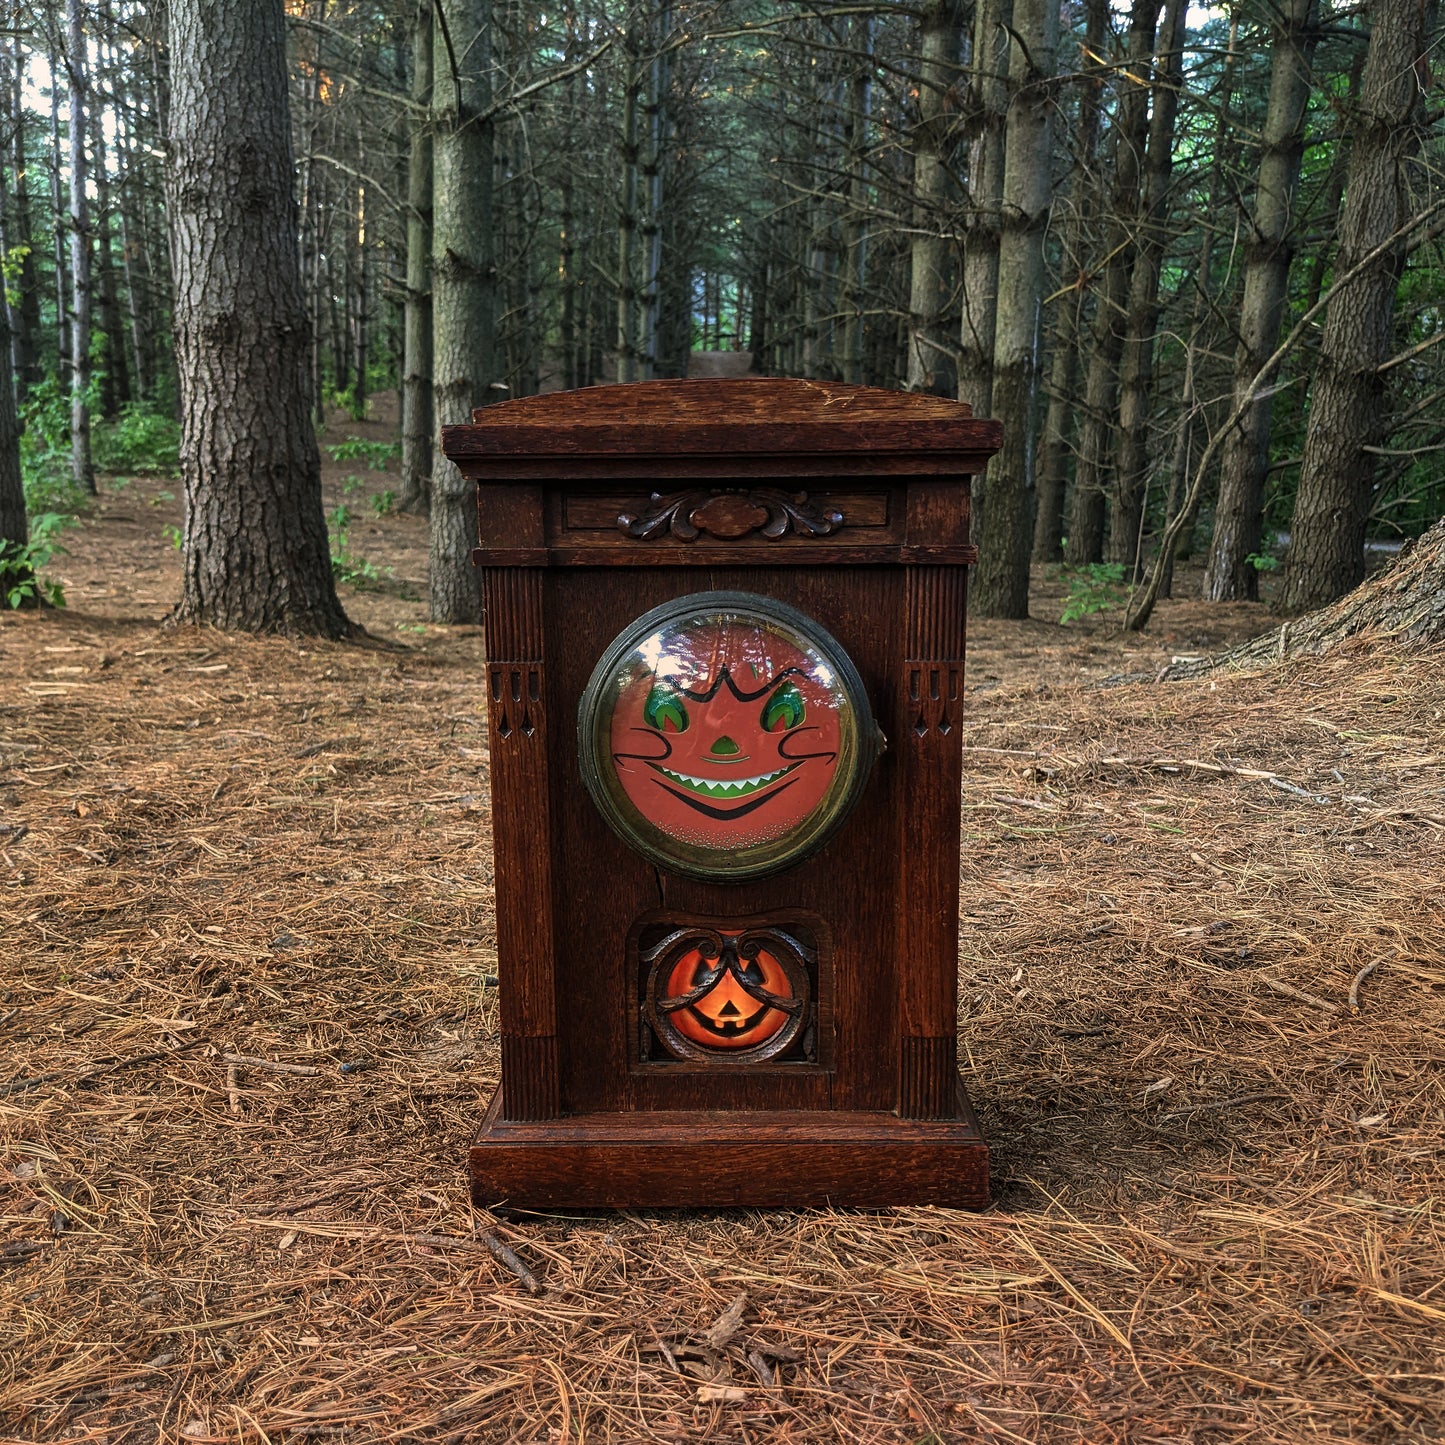 alt="Vintage mantle clock with Halloween face in woods"